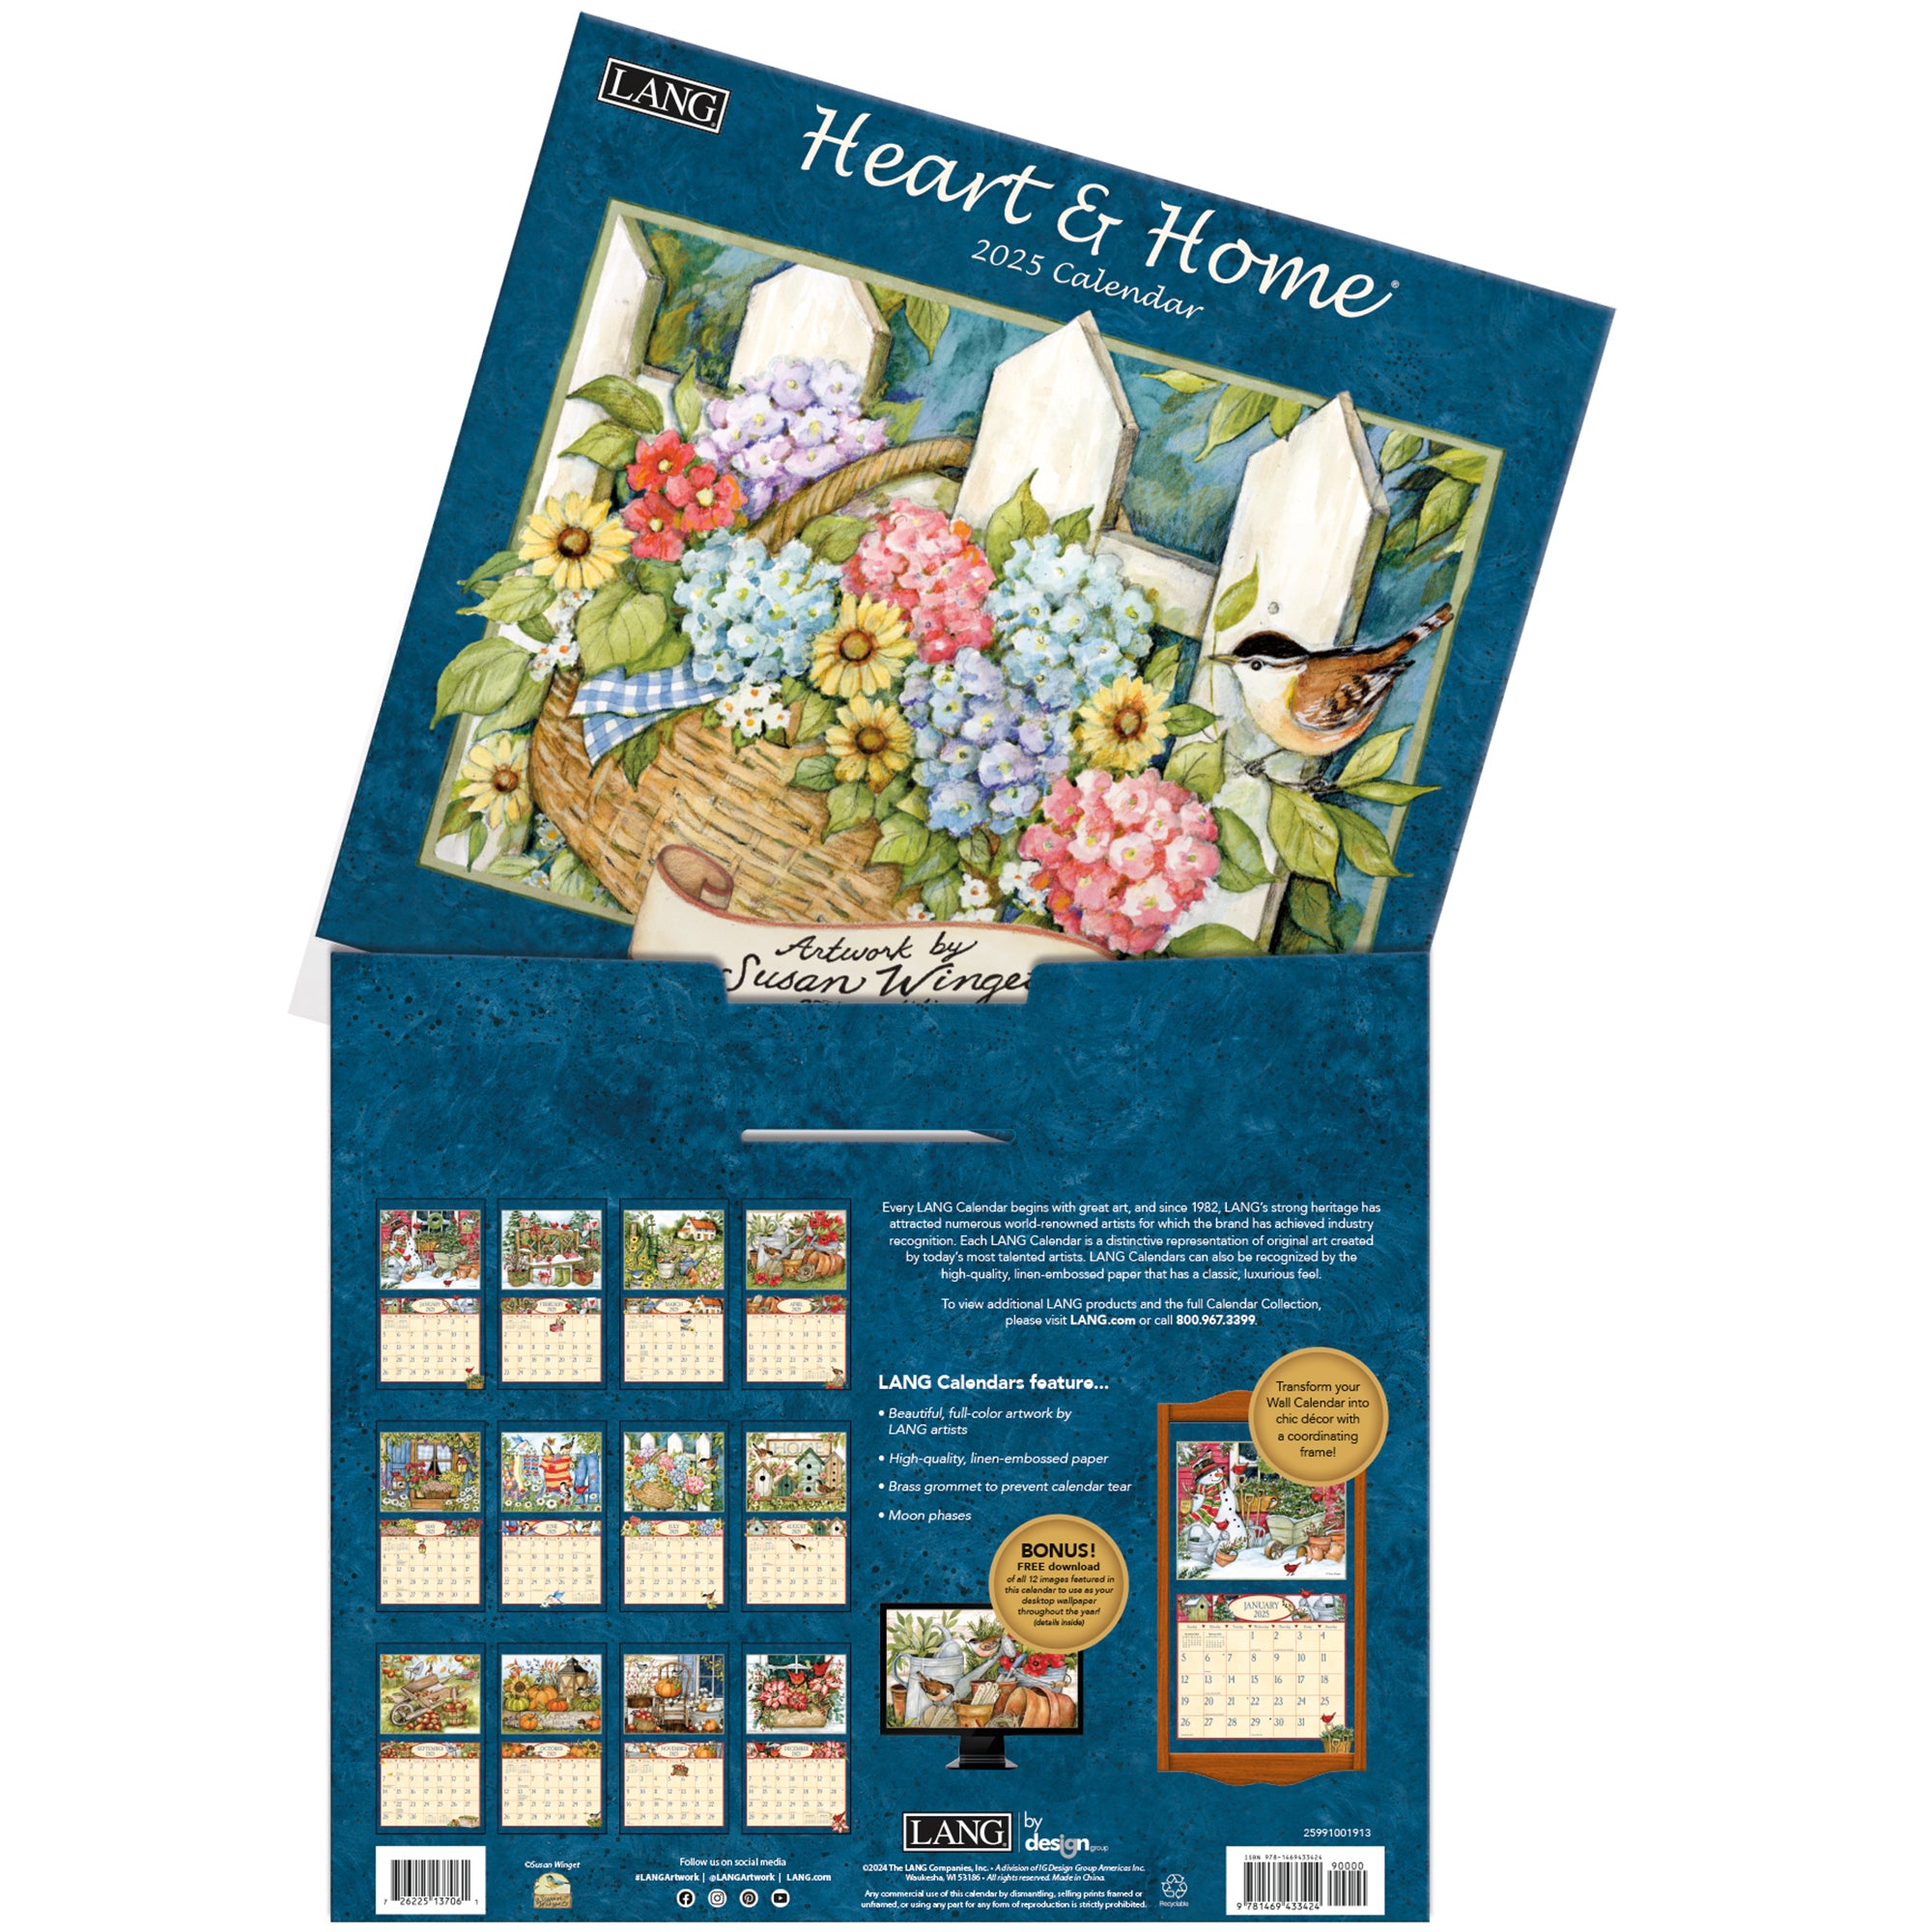 2025 Heart & Home By Susan Winget - LANG Deluxe Wall Calendar